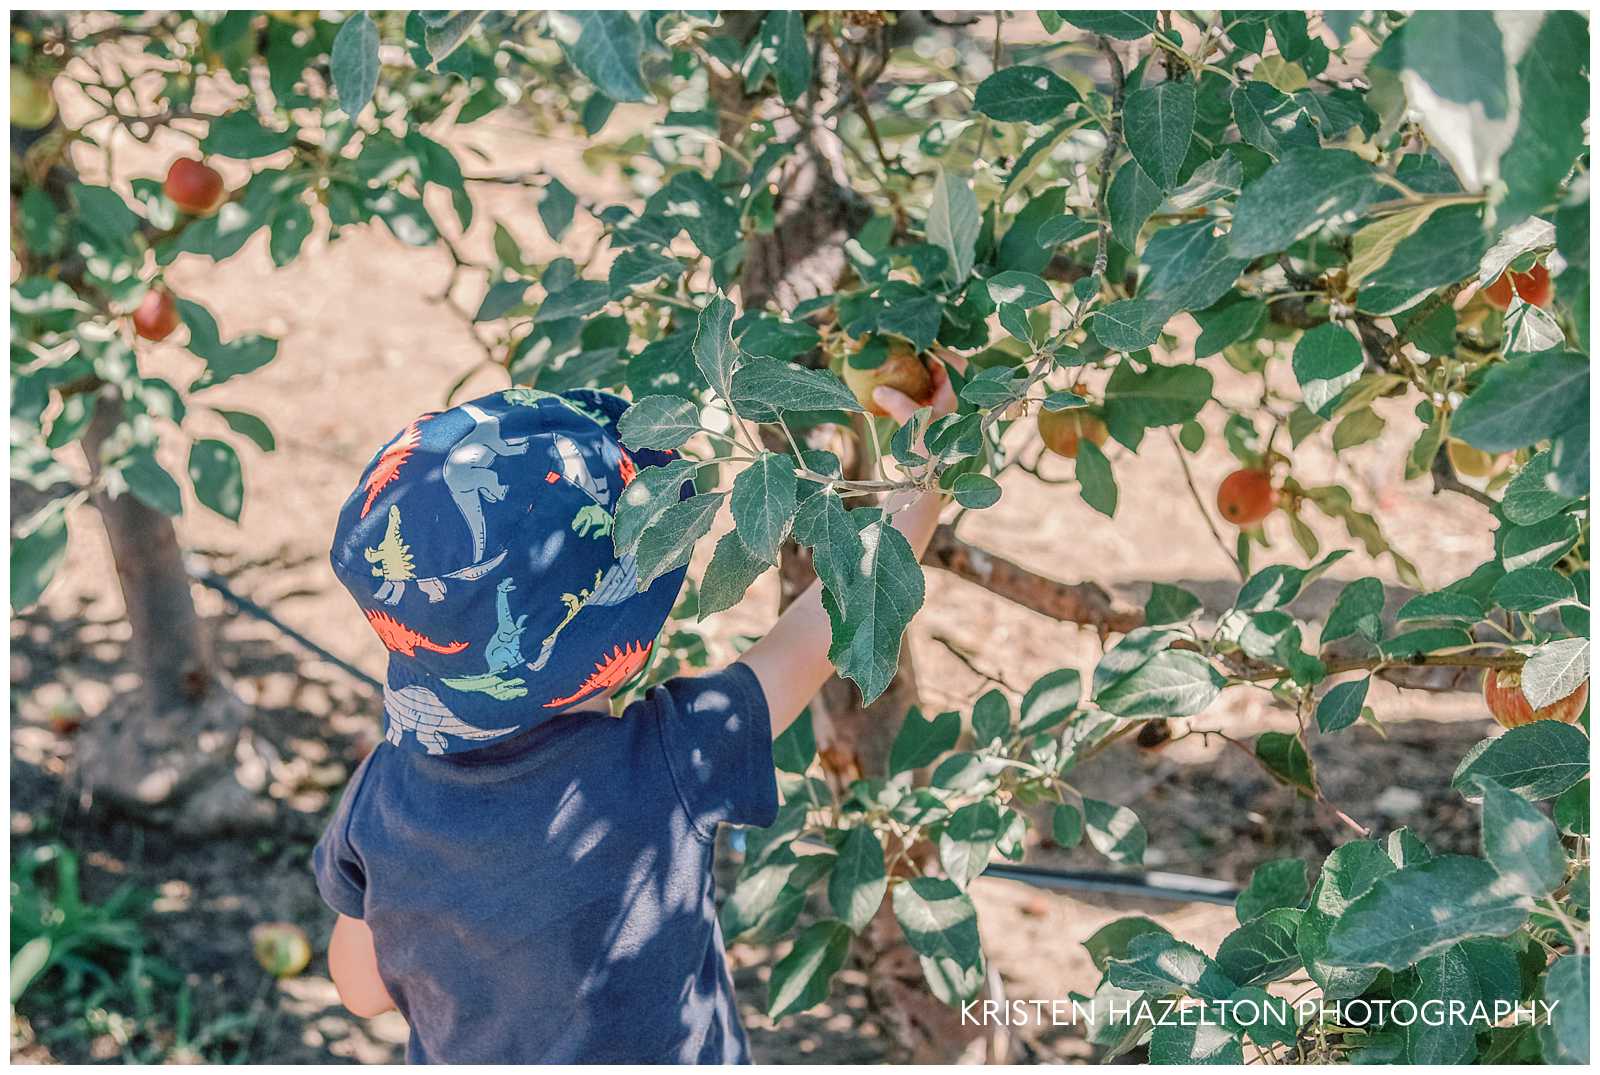 Little boy with a blue dinosaur hat picking an apple at a Chicago orchard